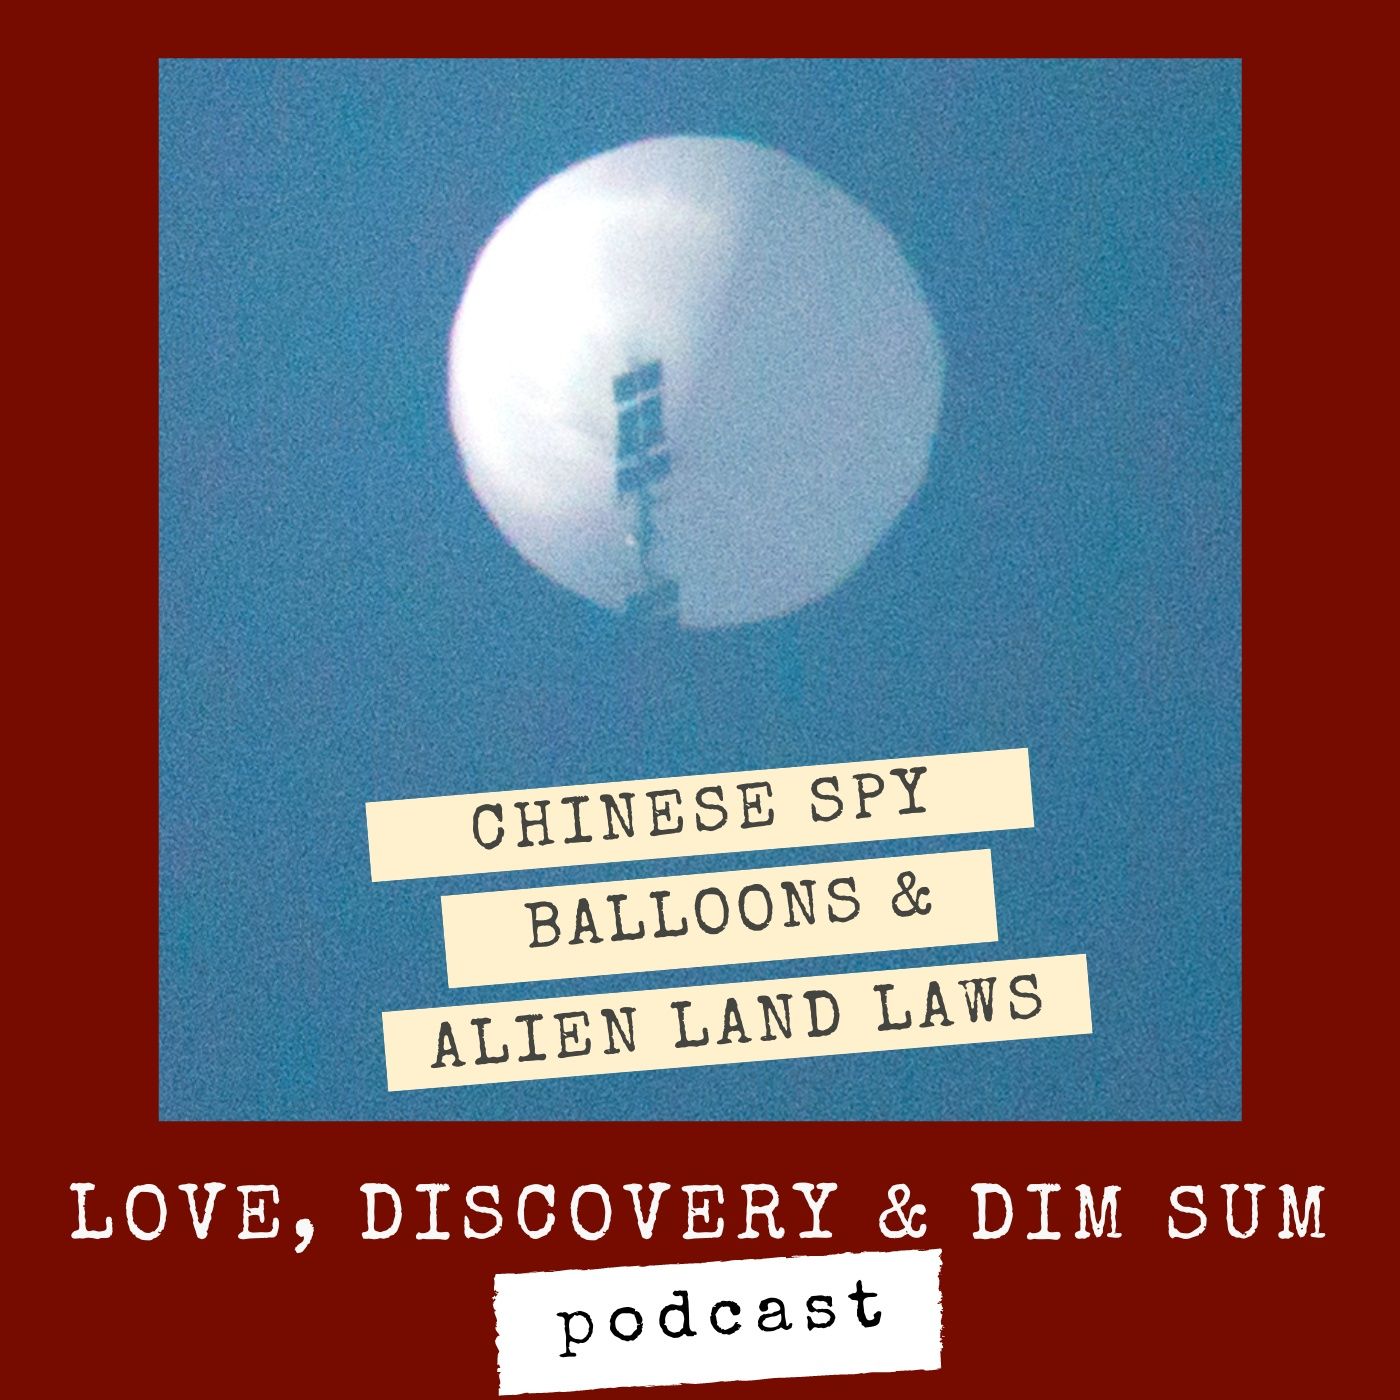 Chinese Spy Balloons & Alien Land Laws